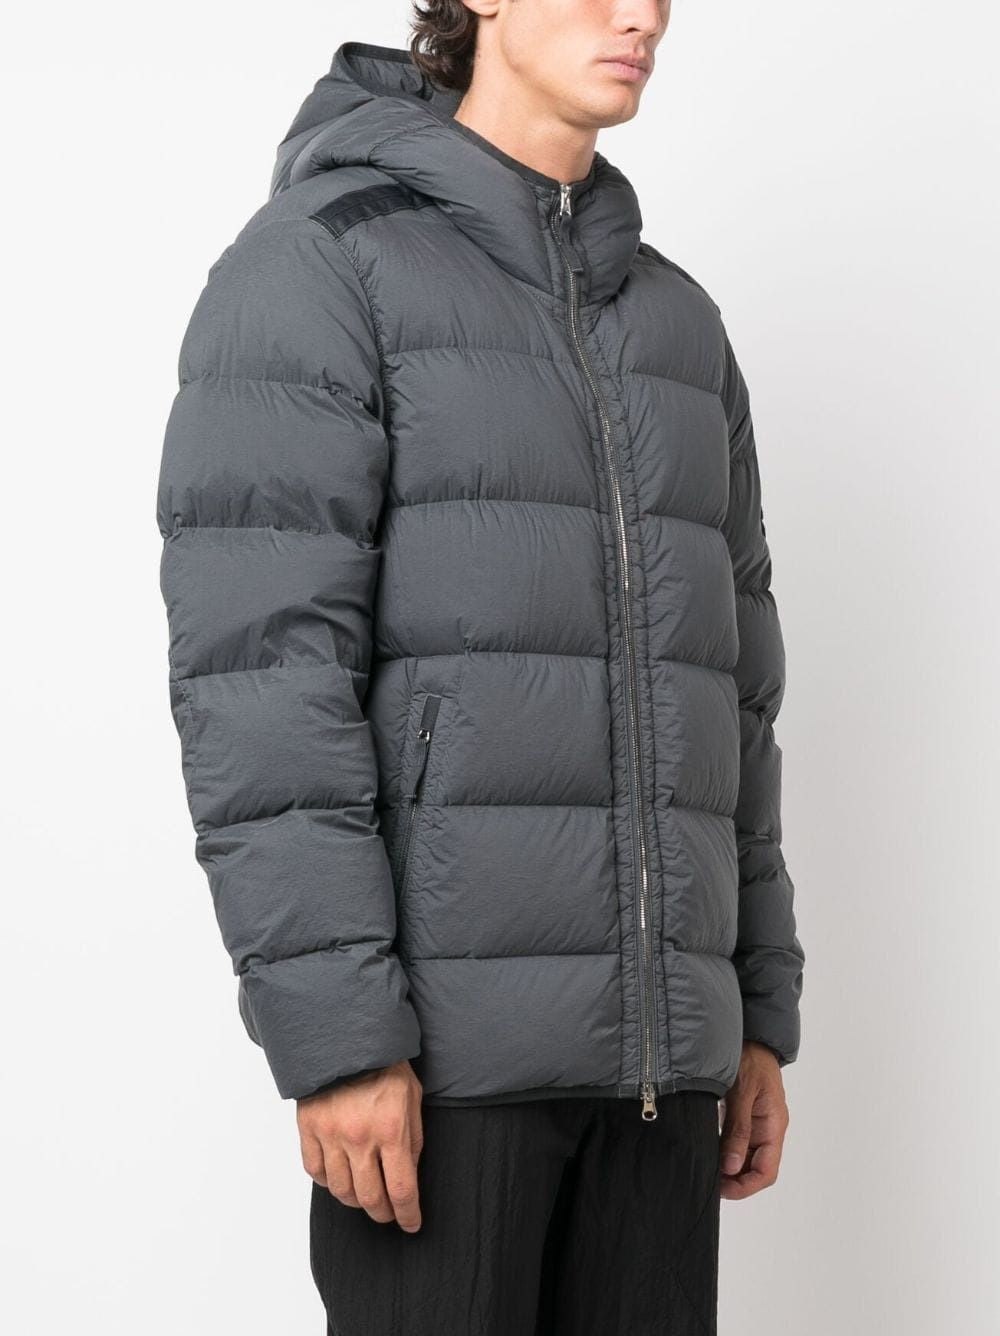 STONE ISLAND Men's Gray Hooded Down Jacket with Removable Logo Patch